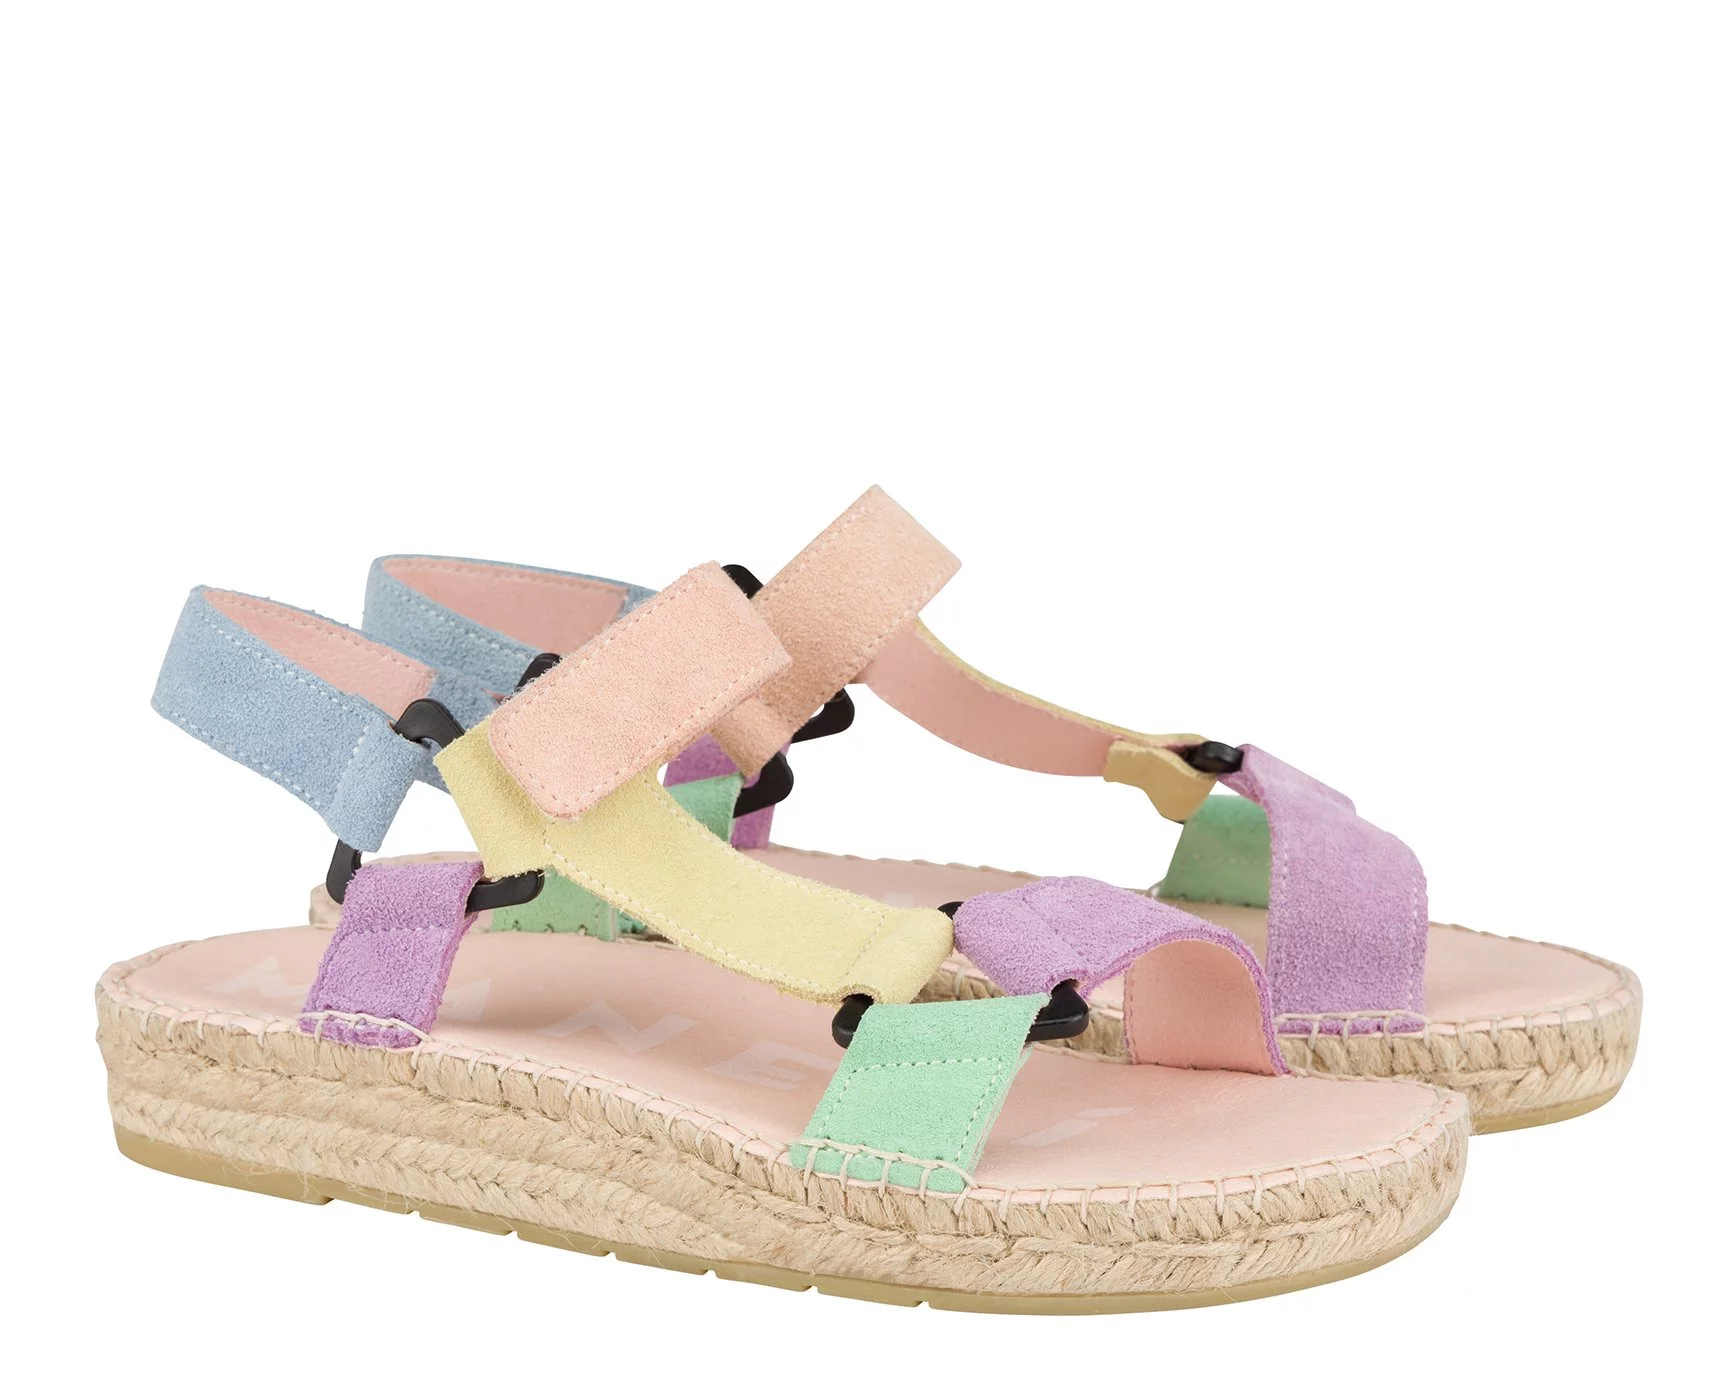 G2.1JH_Hiking_Sandals_Venice_Suede_Yellow_Rose_Lilac_2_1732x1389